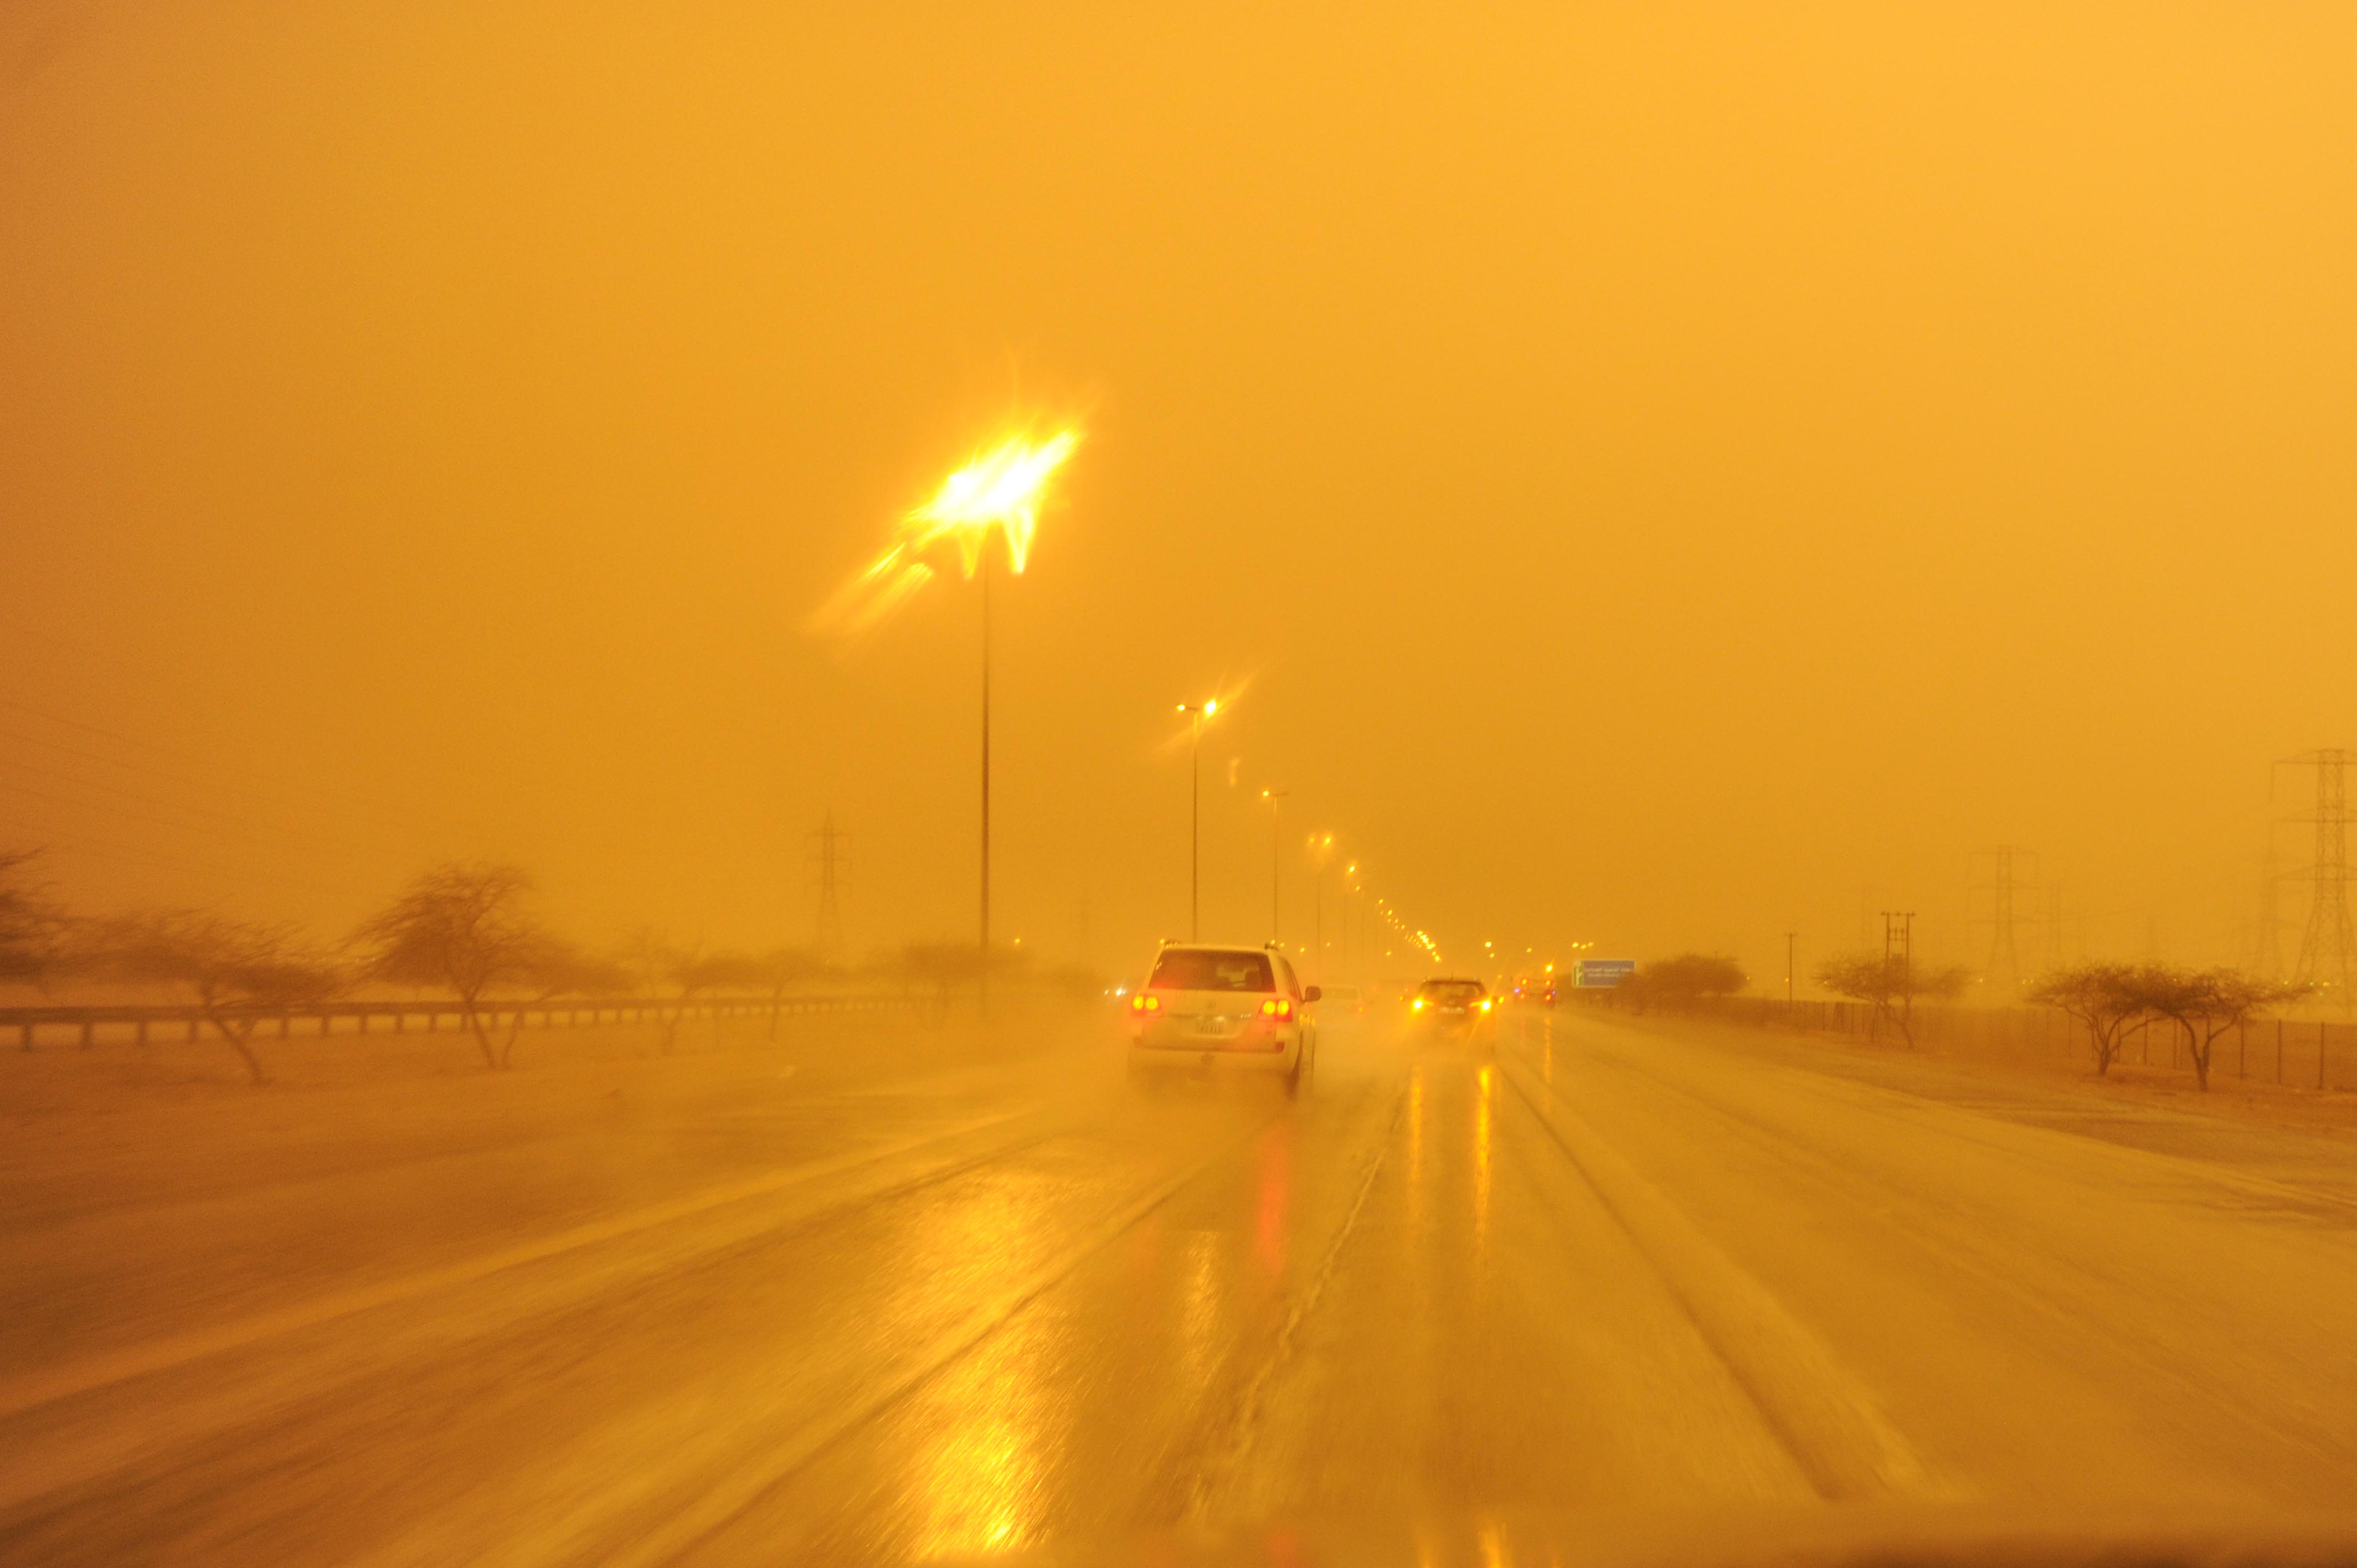 Kuwait witnesses unstable weather conditions, skies turning to orange color despite rain fall